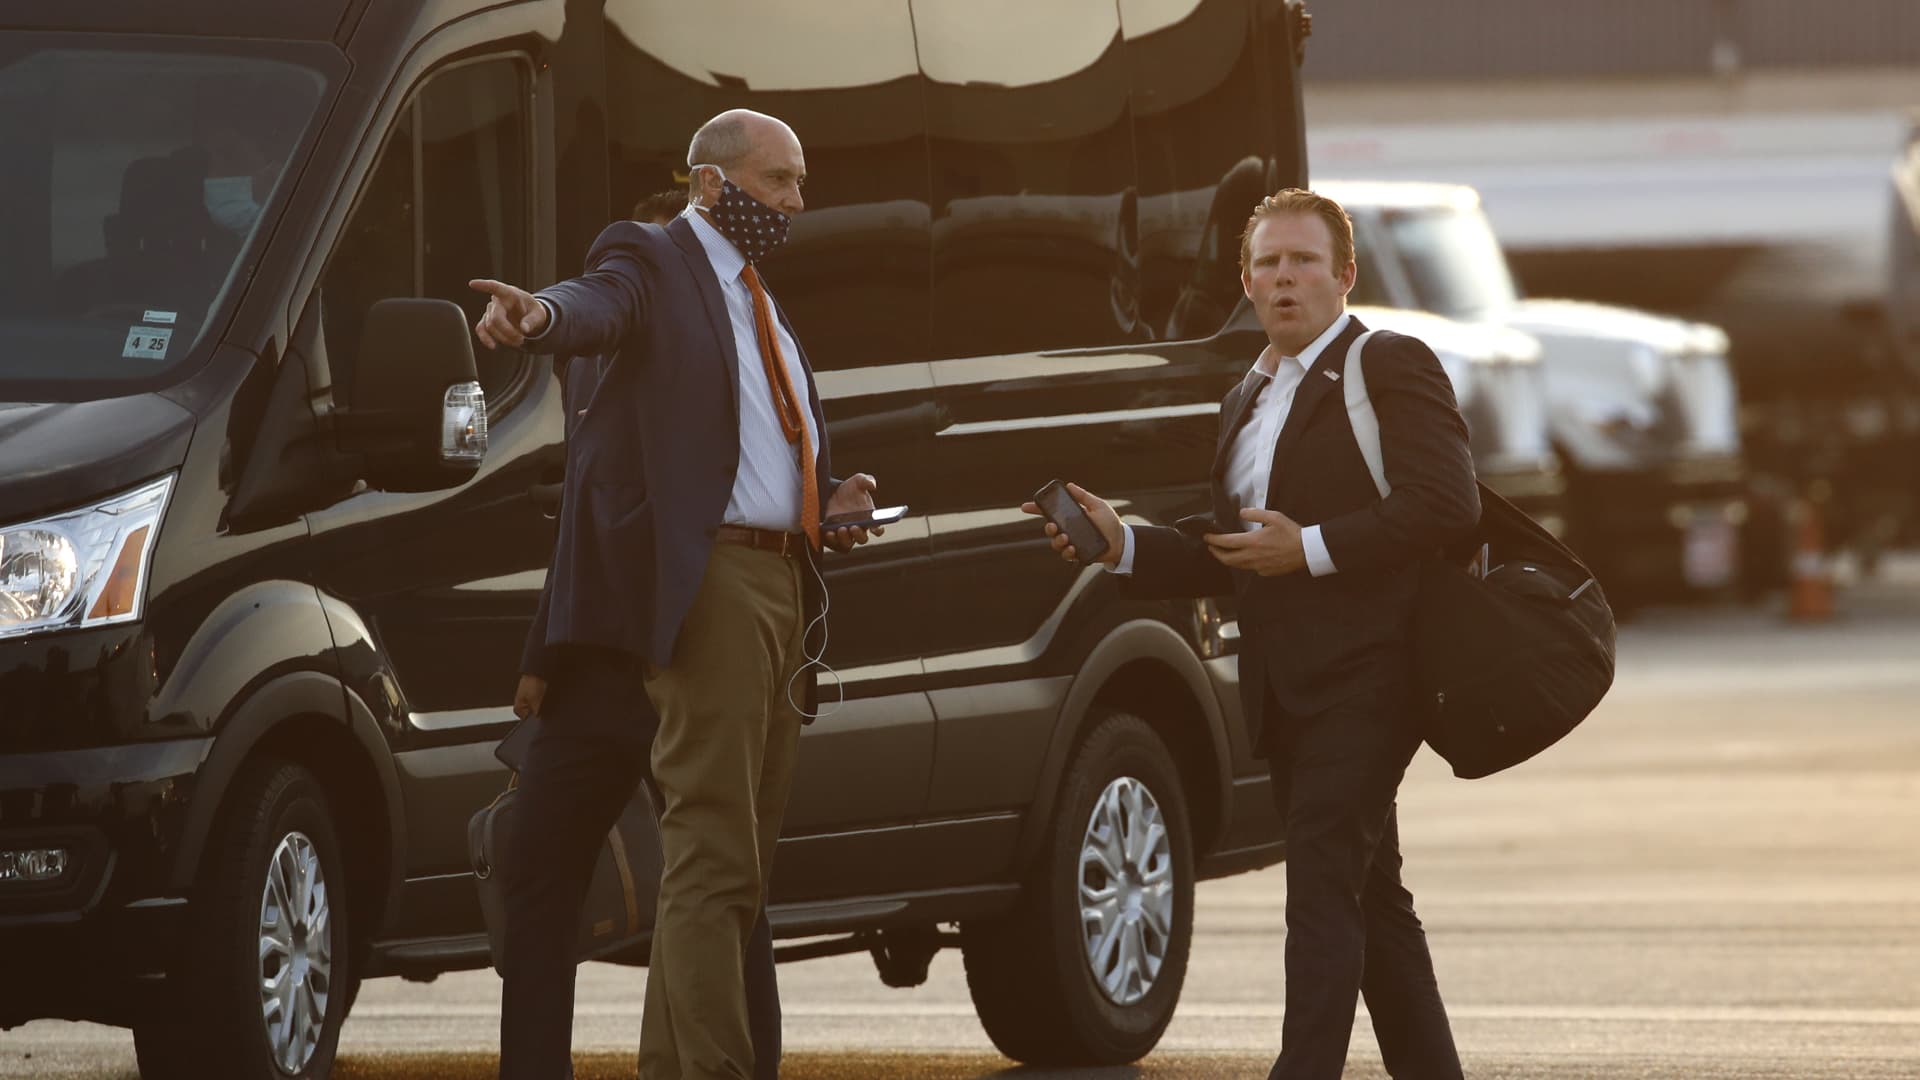 Andrew Giuliani, Special Assistant to President Donald Trump, right, walks to a van after stepping off Air Force One at Morristown Municipal Airport in Morristown, N.J., Friday, July 24, 2020.